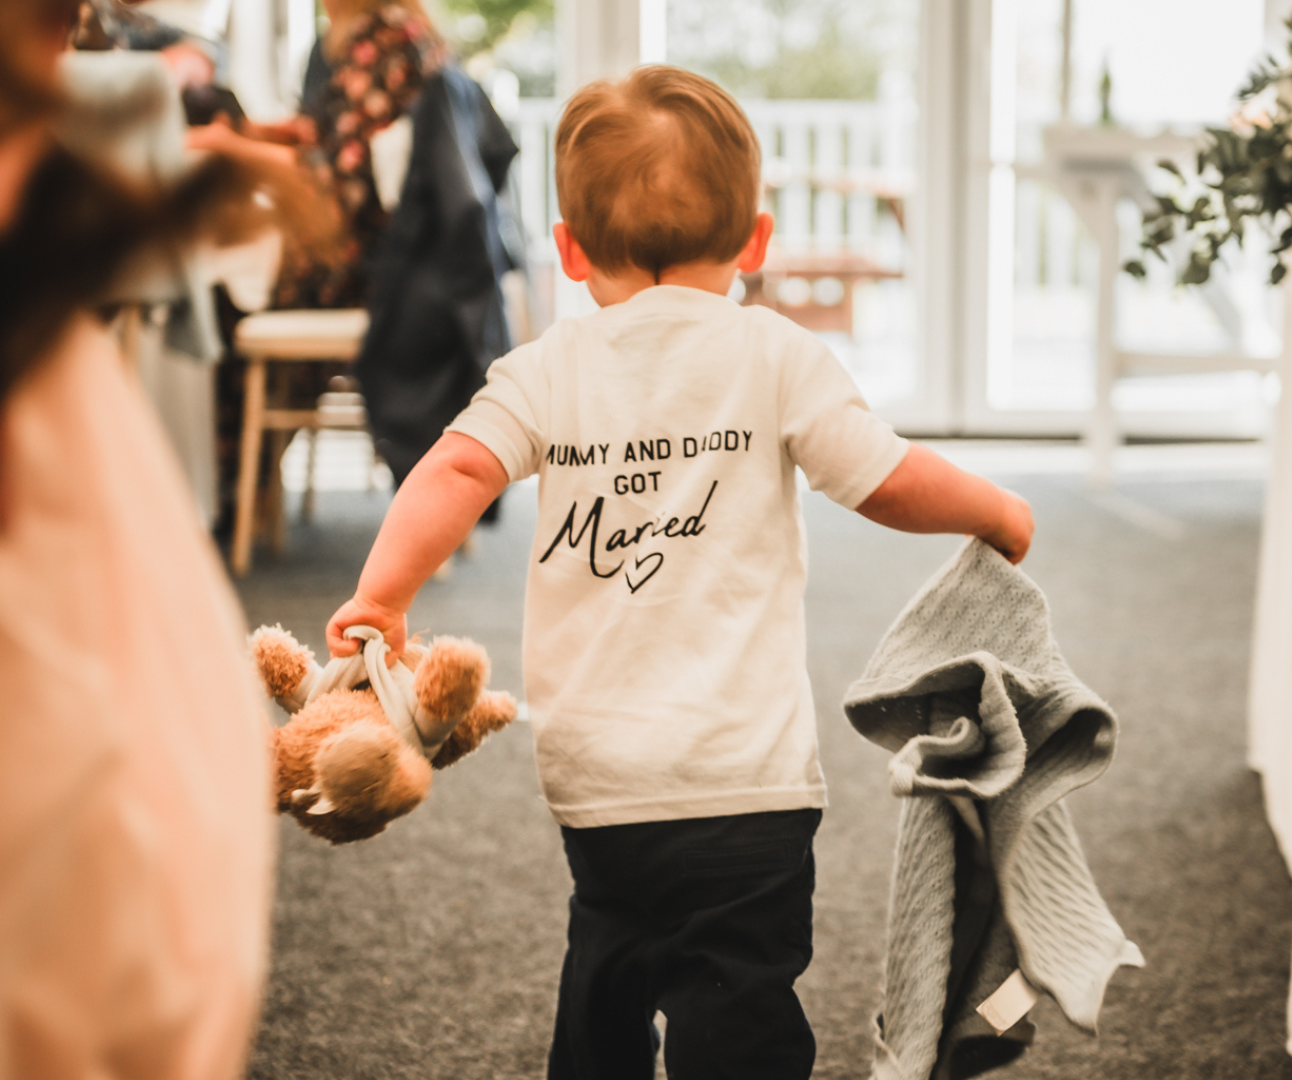 Alfie carrying a teddy bear and wearing a shirt saying Mummy and Daddy got married